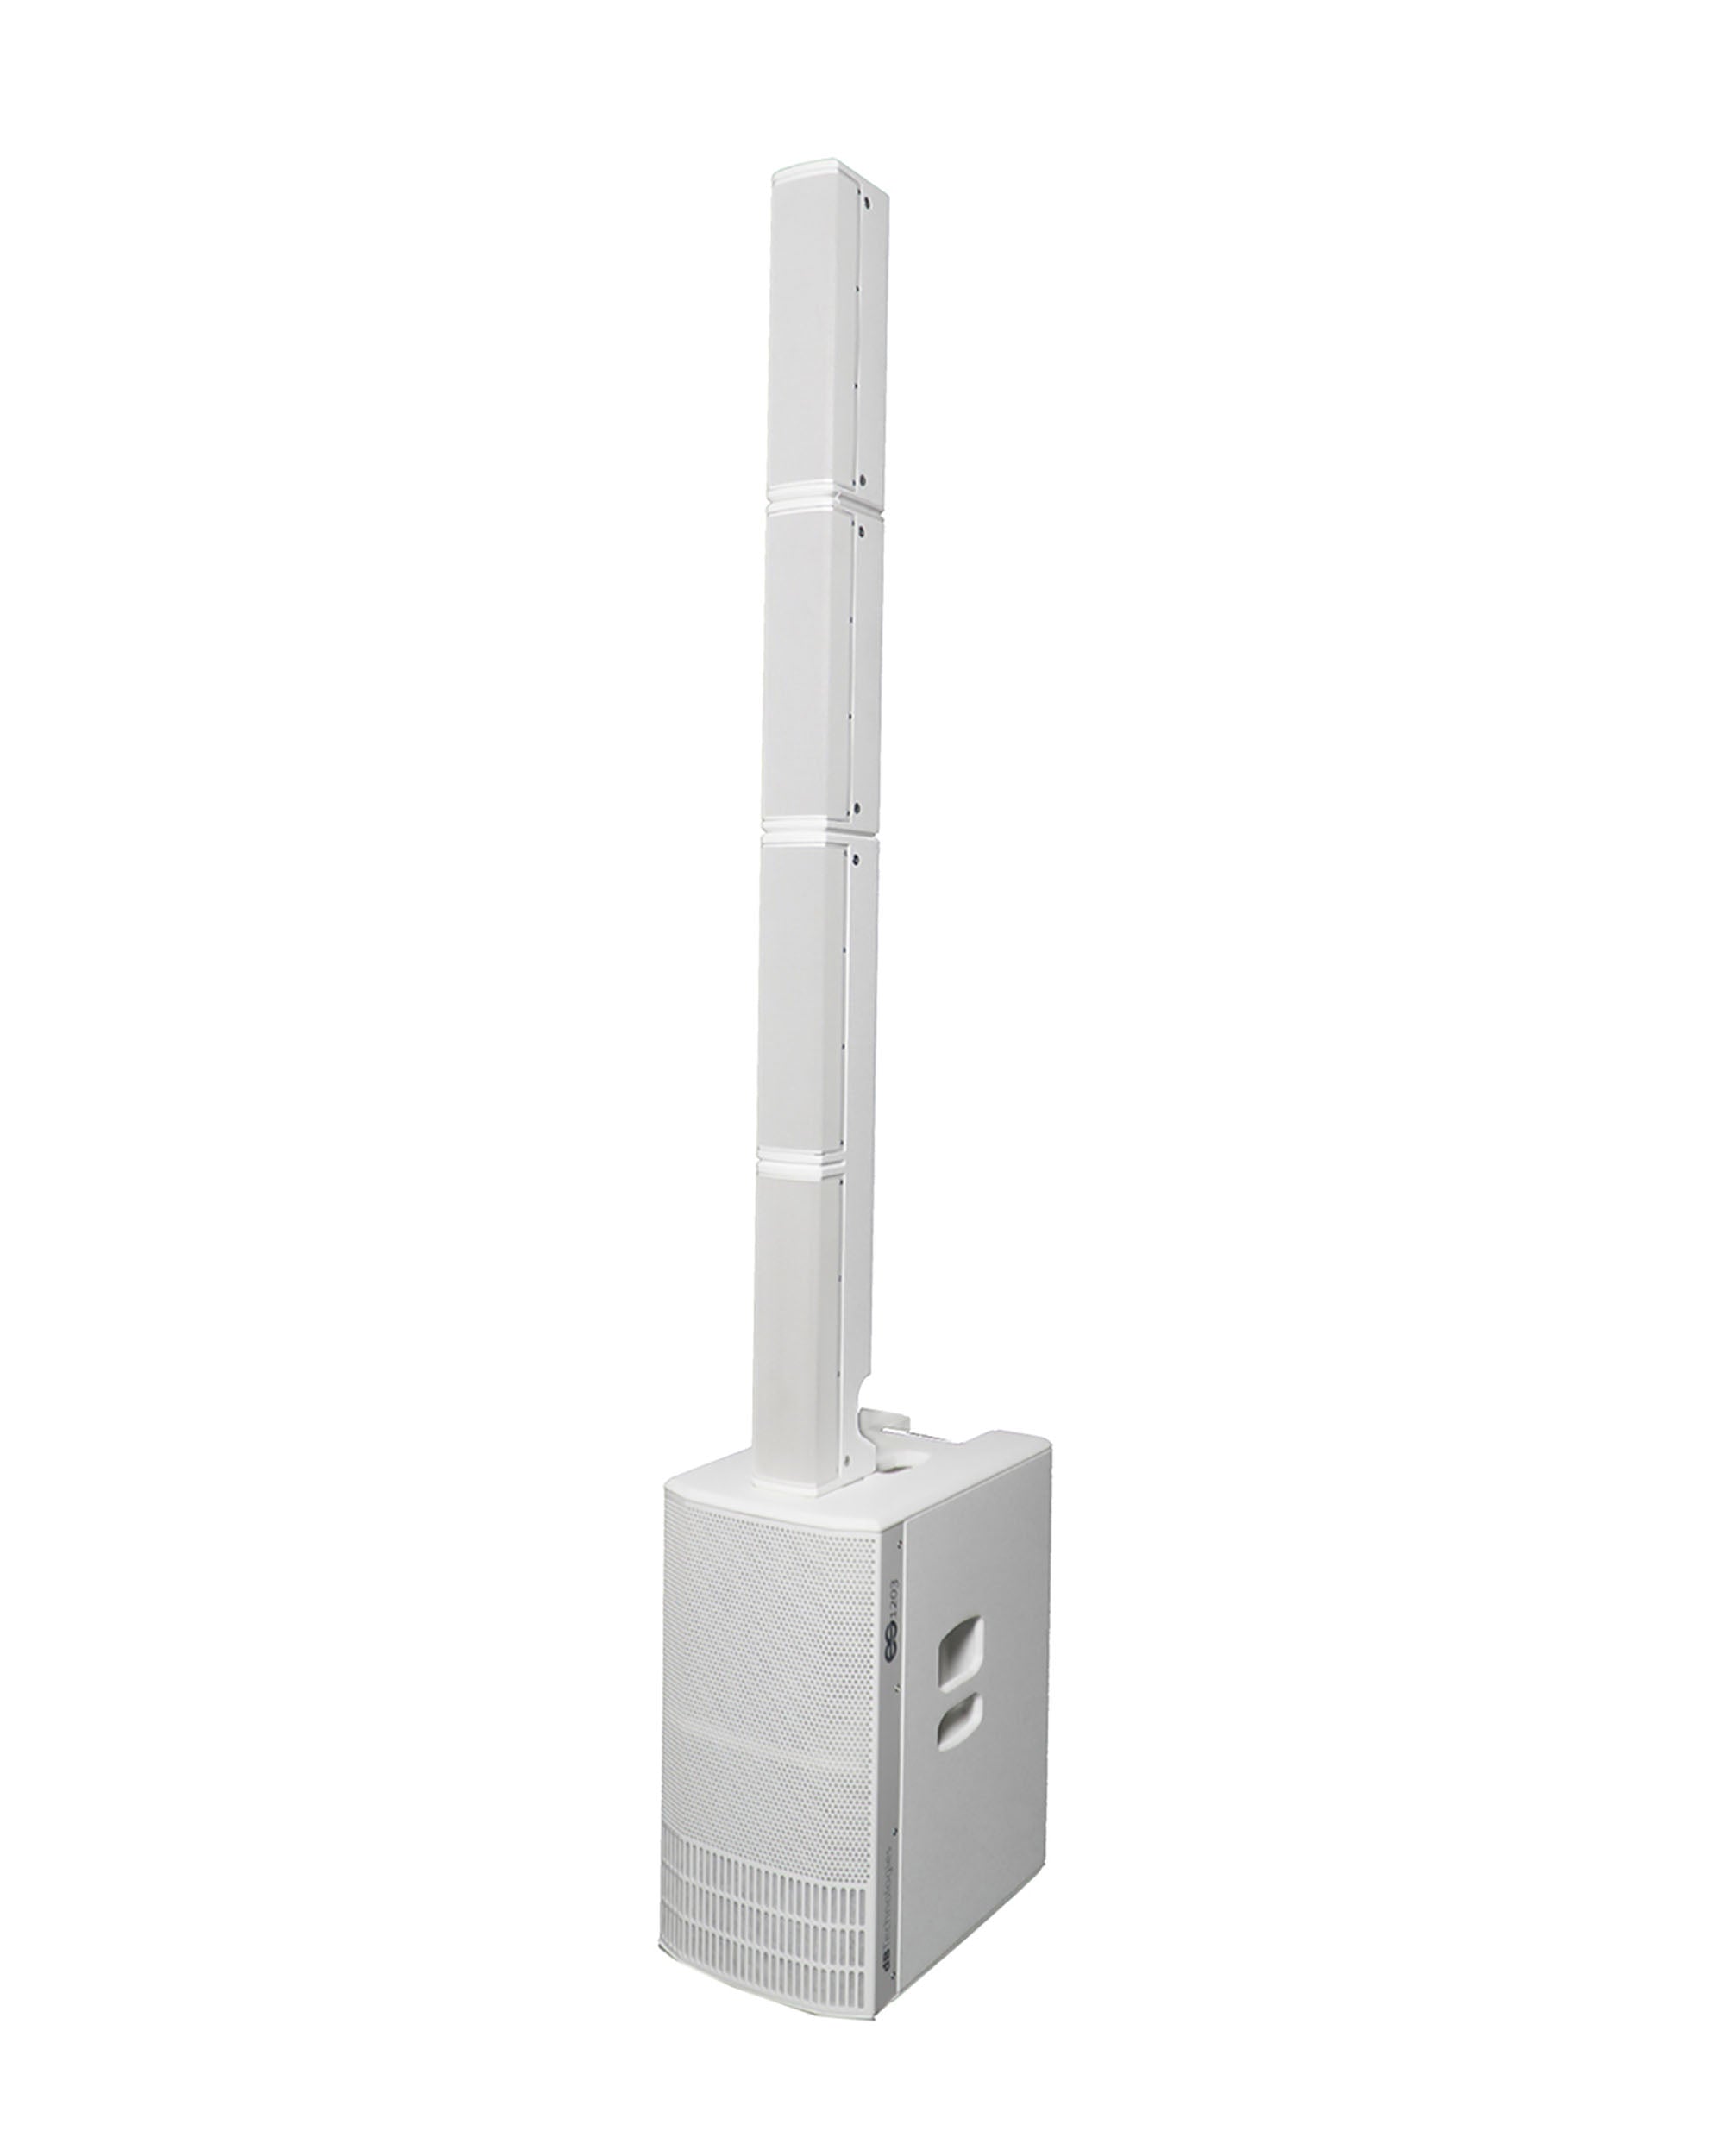 dB Technologies ES1203WDP Portable Stereo Sound System DJ Package with Design Pole - White by DB Technologies